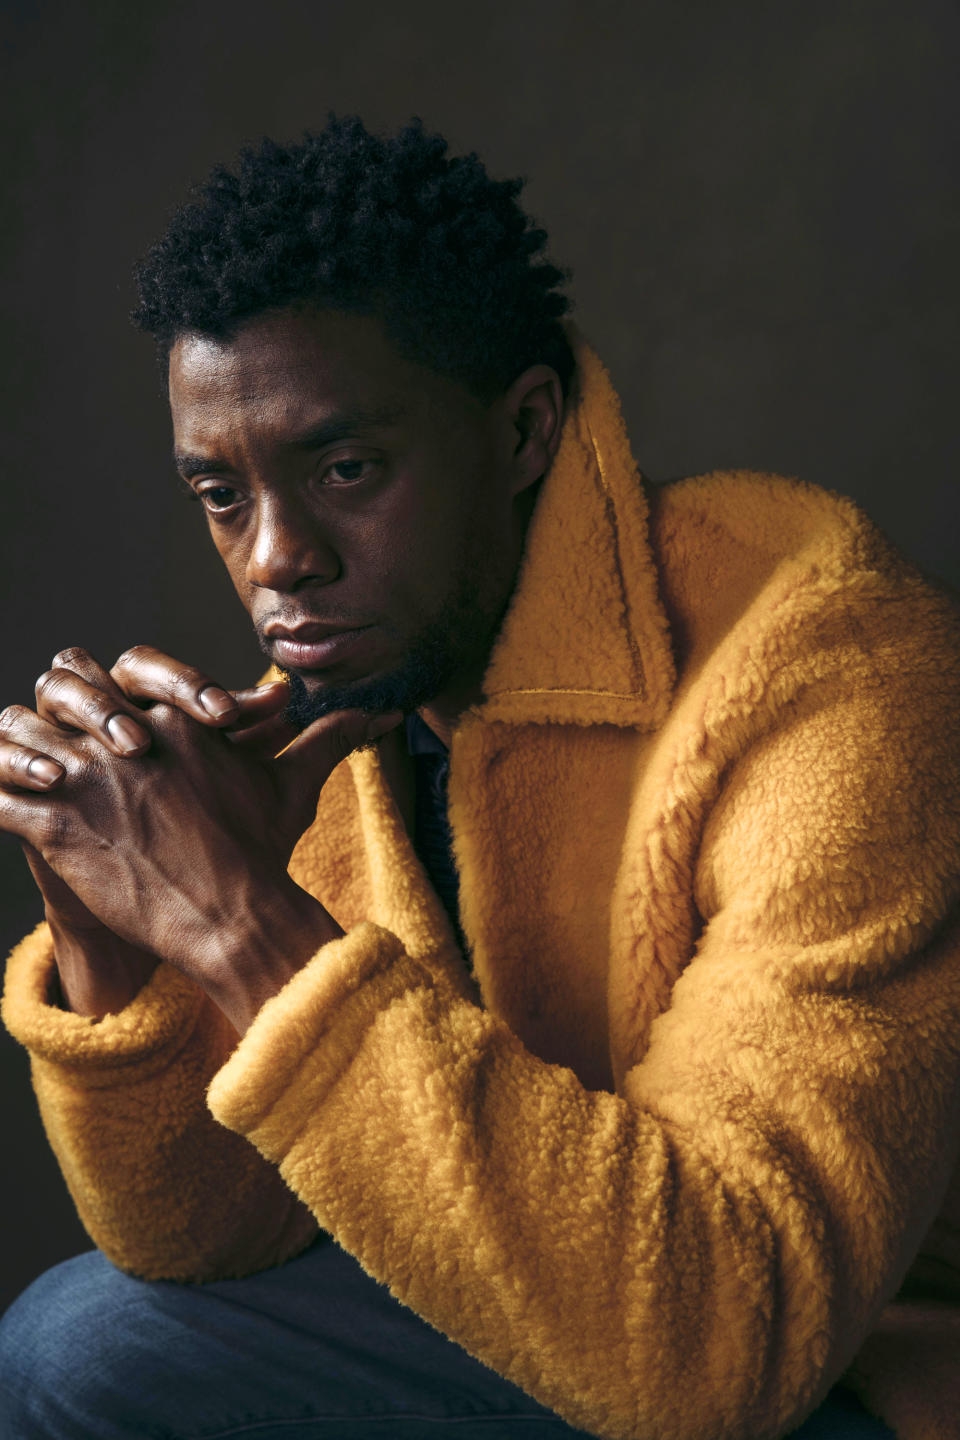 FILE - In this Feb. 14, 2018 photo, actor Chadwick Boseman poses for a portrait in New York to promote his film, "Black Panther." Boseman, who played Black icons Jackie Robinson and James Brown before finding fame as the regal Black Panther in the Marvel cinematic universe, has died of cancer. His representative says Boseman died Friday, Aug. 28, 2020 in Los Angeles after a four-year battle with colon cancer. He was 43. (Photo by Victoria Will/Invision/AP, File)